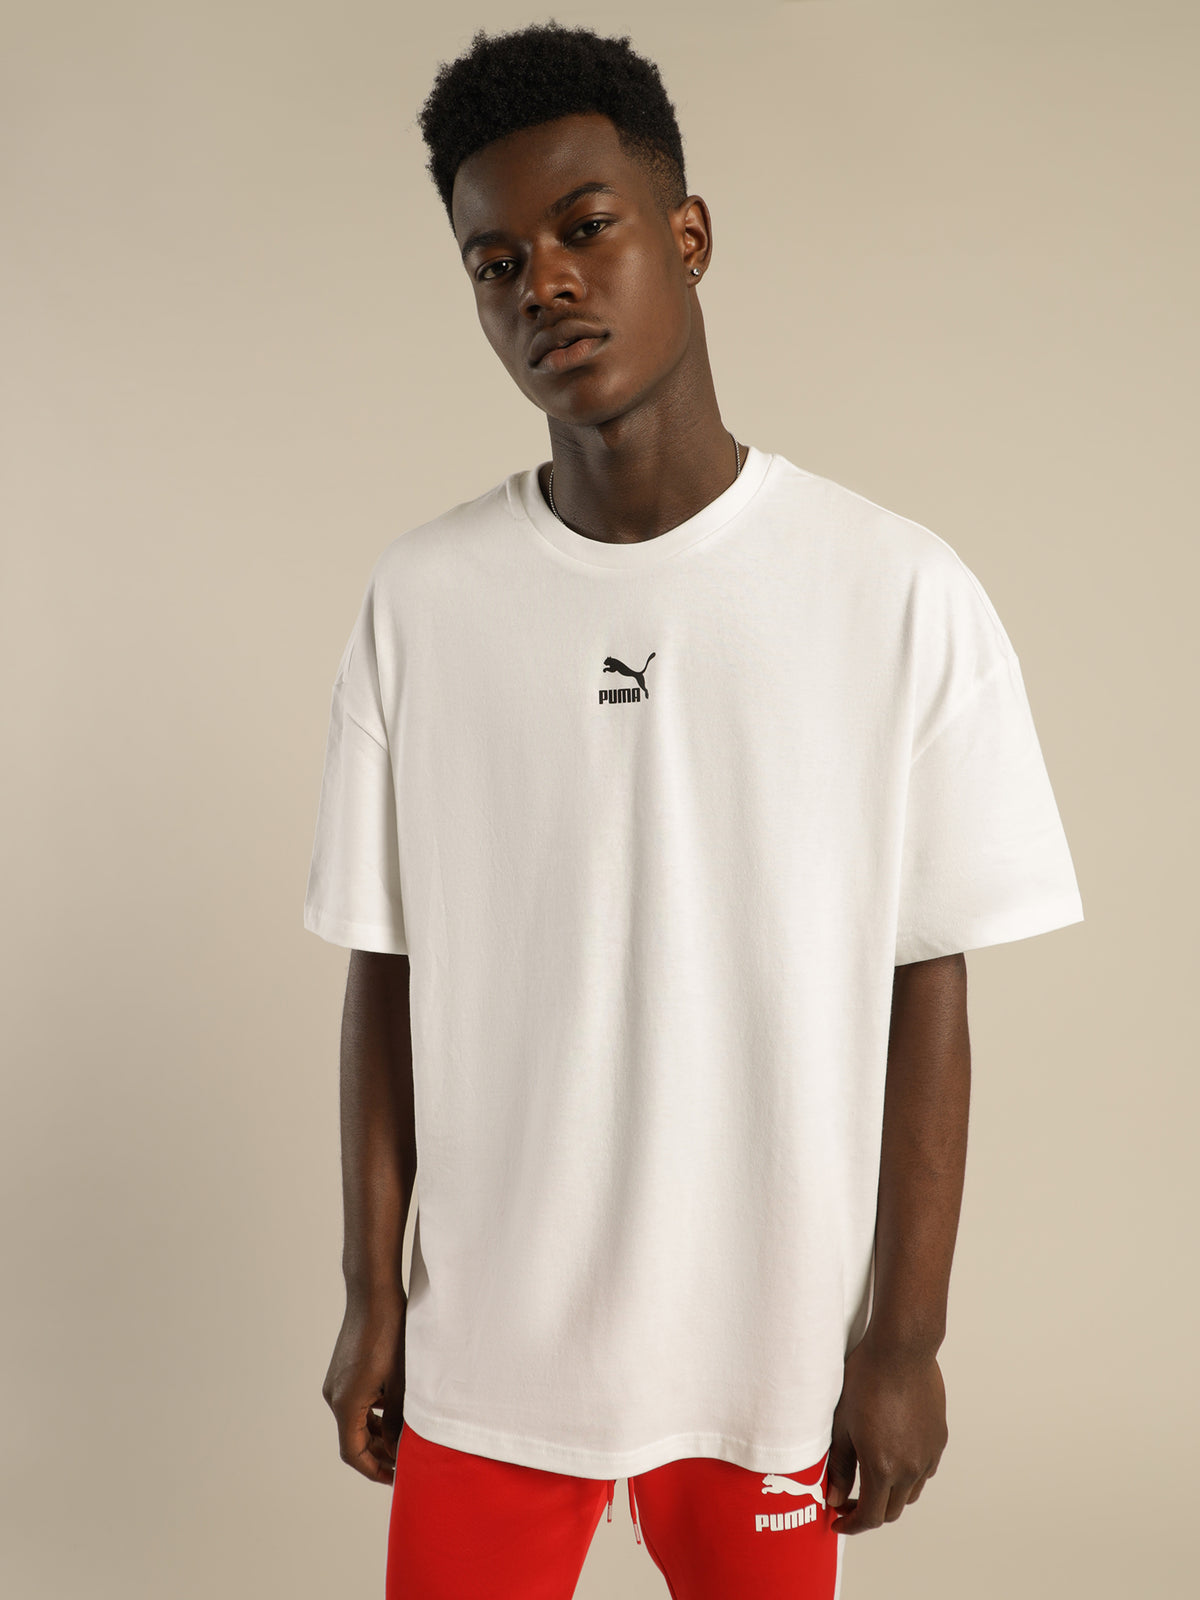 Classic Boxy T-Shirt in White